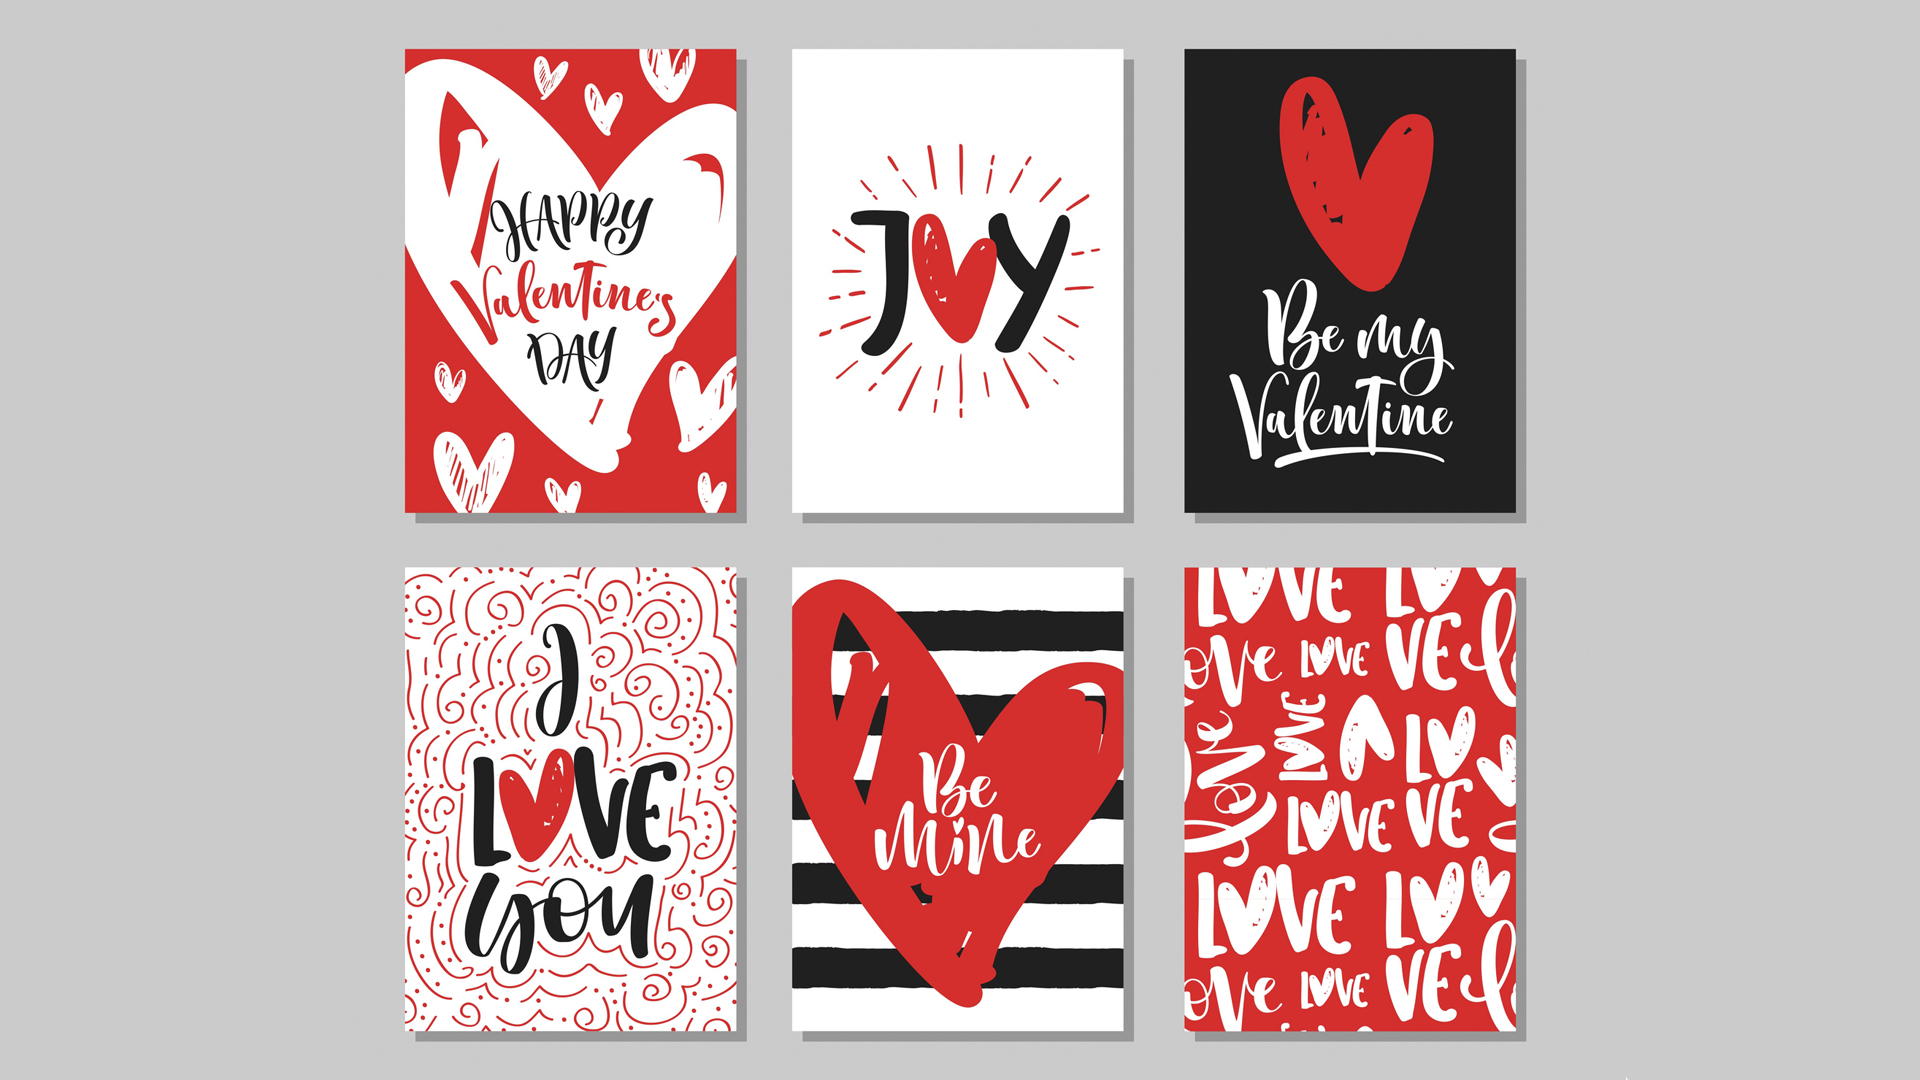 A selection of Valentine's Day cards